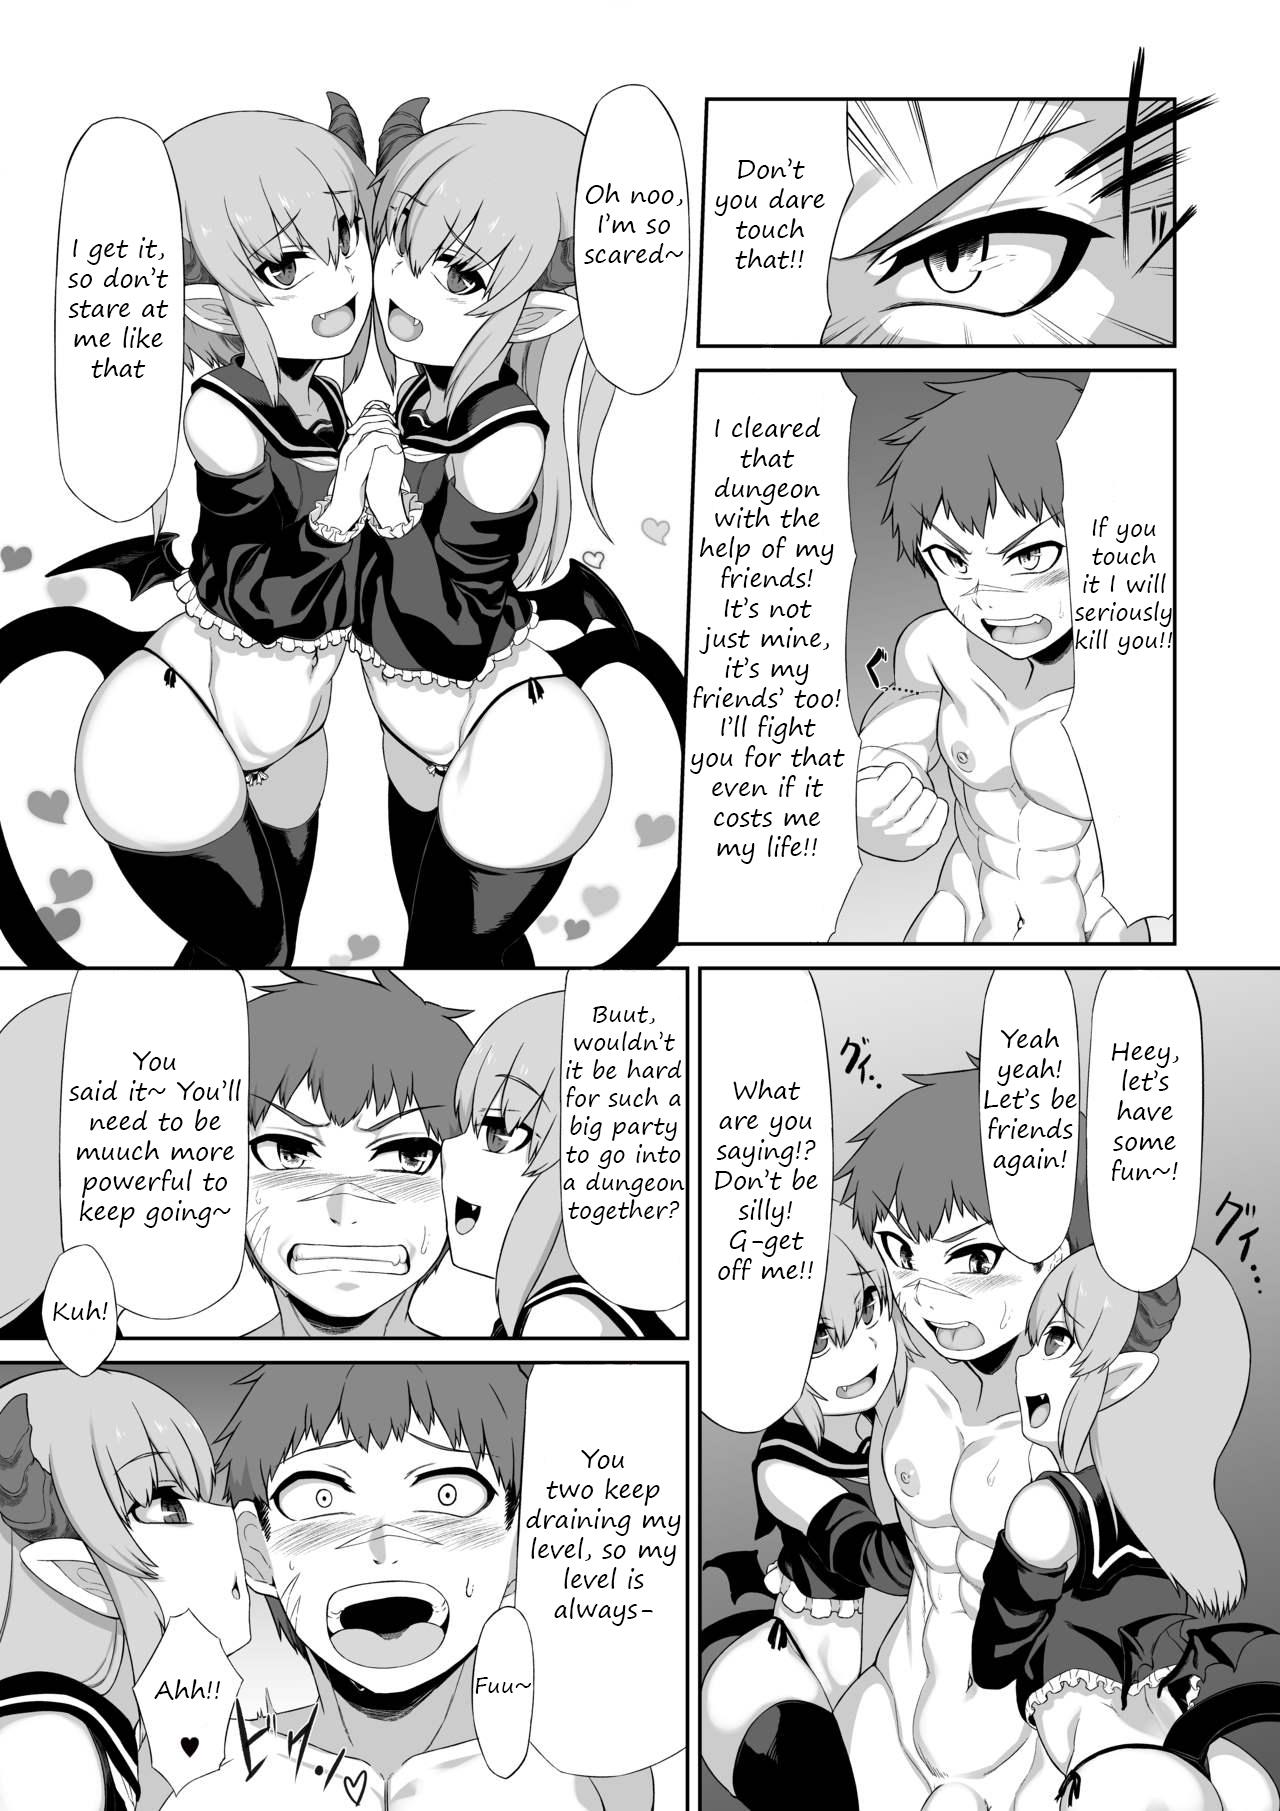 Shecock Futago Succubus to Mahou no Onaho | The Succubus Twins and the Magical Onahole - Original Bwc - Page 12